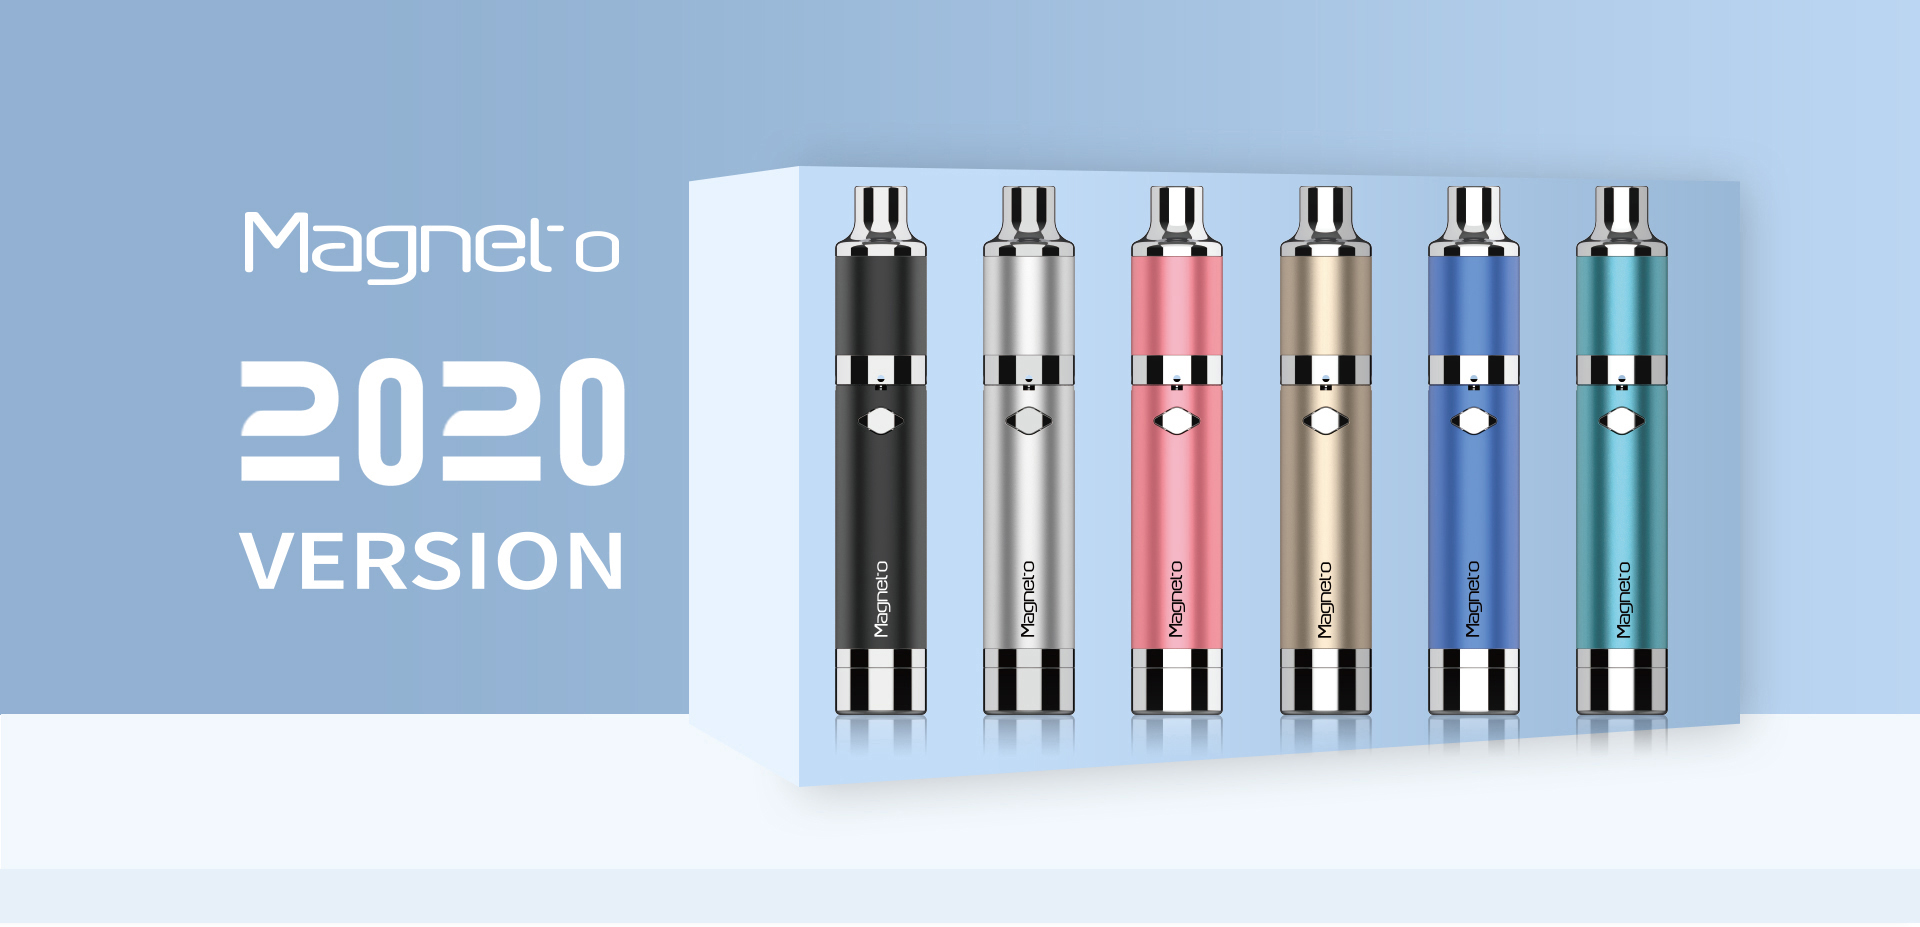 Yocan Magneto concentrate vaporizer pen 2020 version is an all-in-one concentrate vape pen, the perfect on the go device, the game changer in the market 2020.